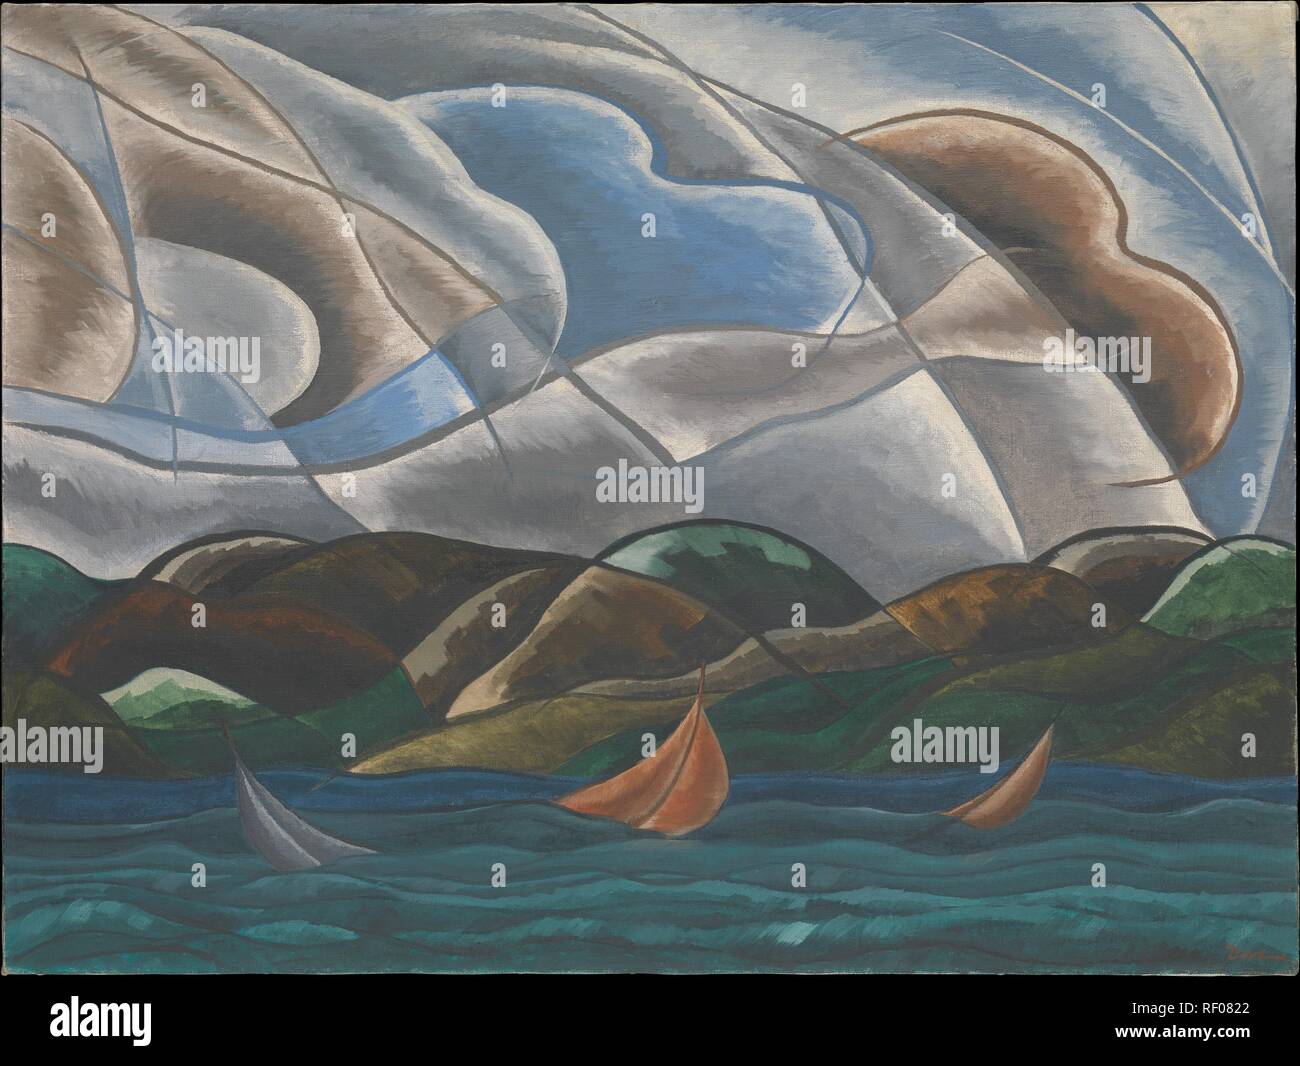 Arthur Dove (American, Canandaigua, New York 1880â€“1946 Huntington, New York ) Clouds and Water, 1930 Oil on canvas, with selective varnish; 29 5/8 x 39 5/8 in. (75.2 x 100.6 cm) The Metropolitan Museum of Art, New York, Alfred Stieglitz Collection, 1949 (49.70.40) http://www.metmuseum.org/Collections/search-the-collections/488484 Stock Photo